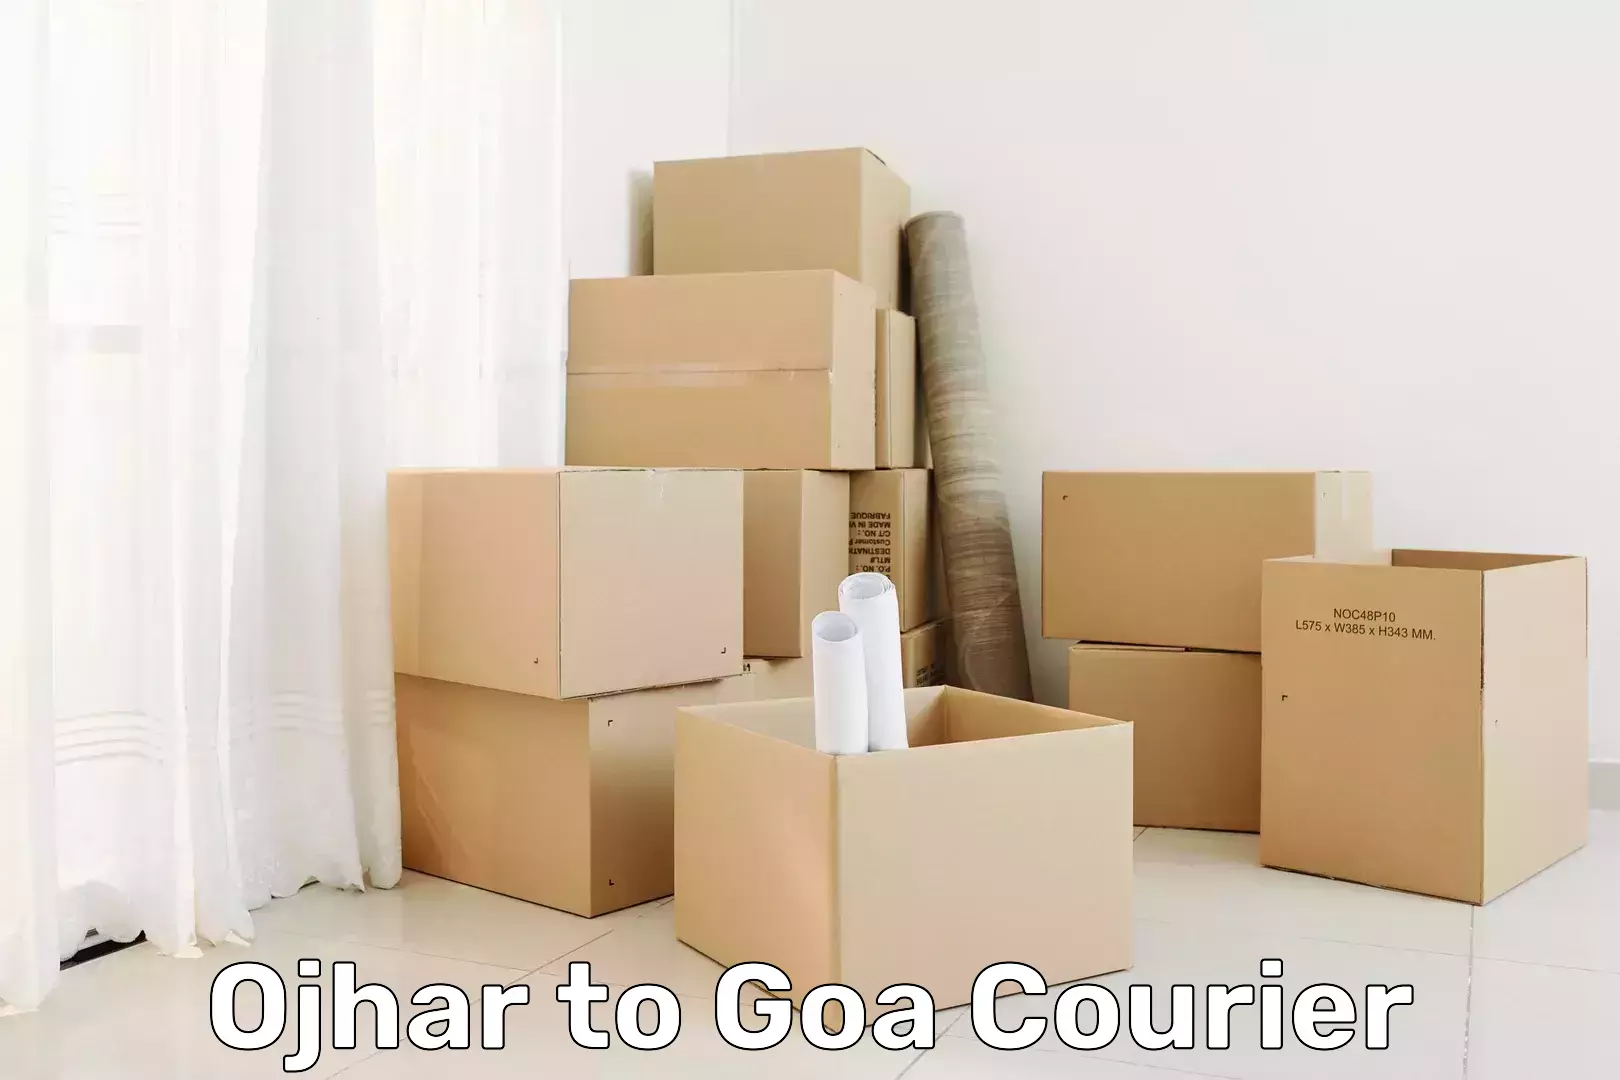 Nationwide delivery network Ojhar to Goa